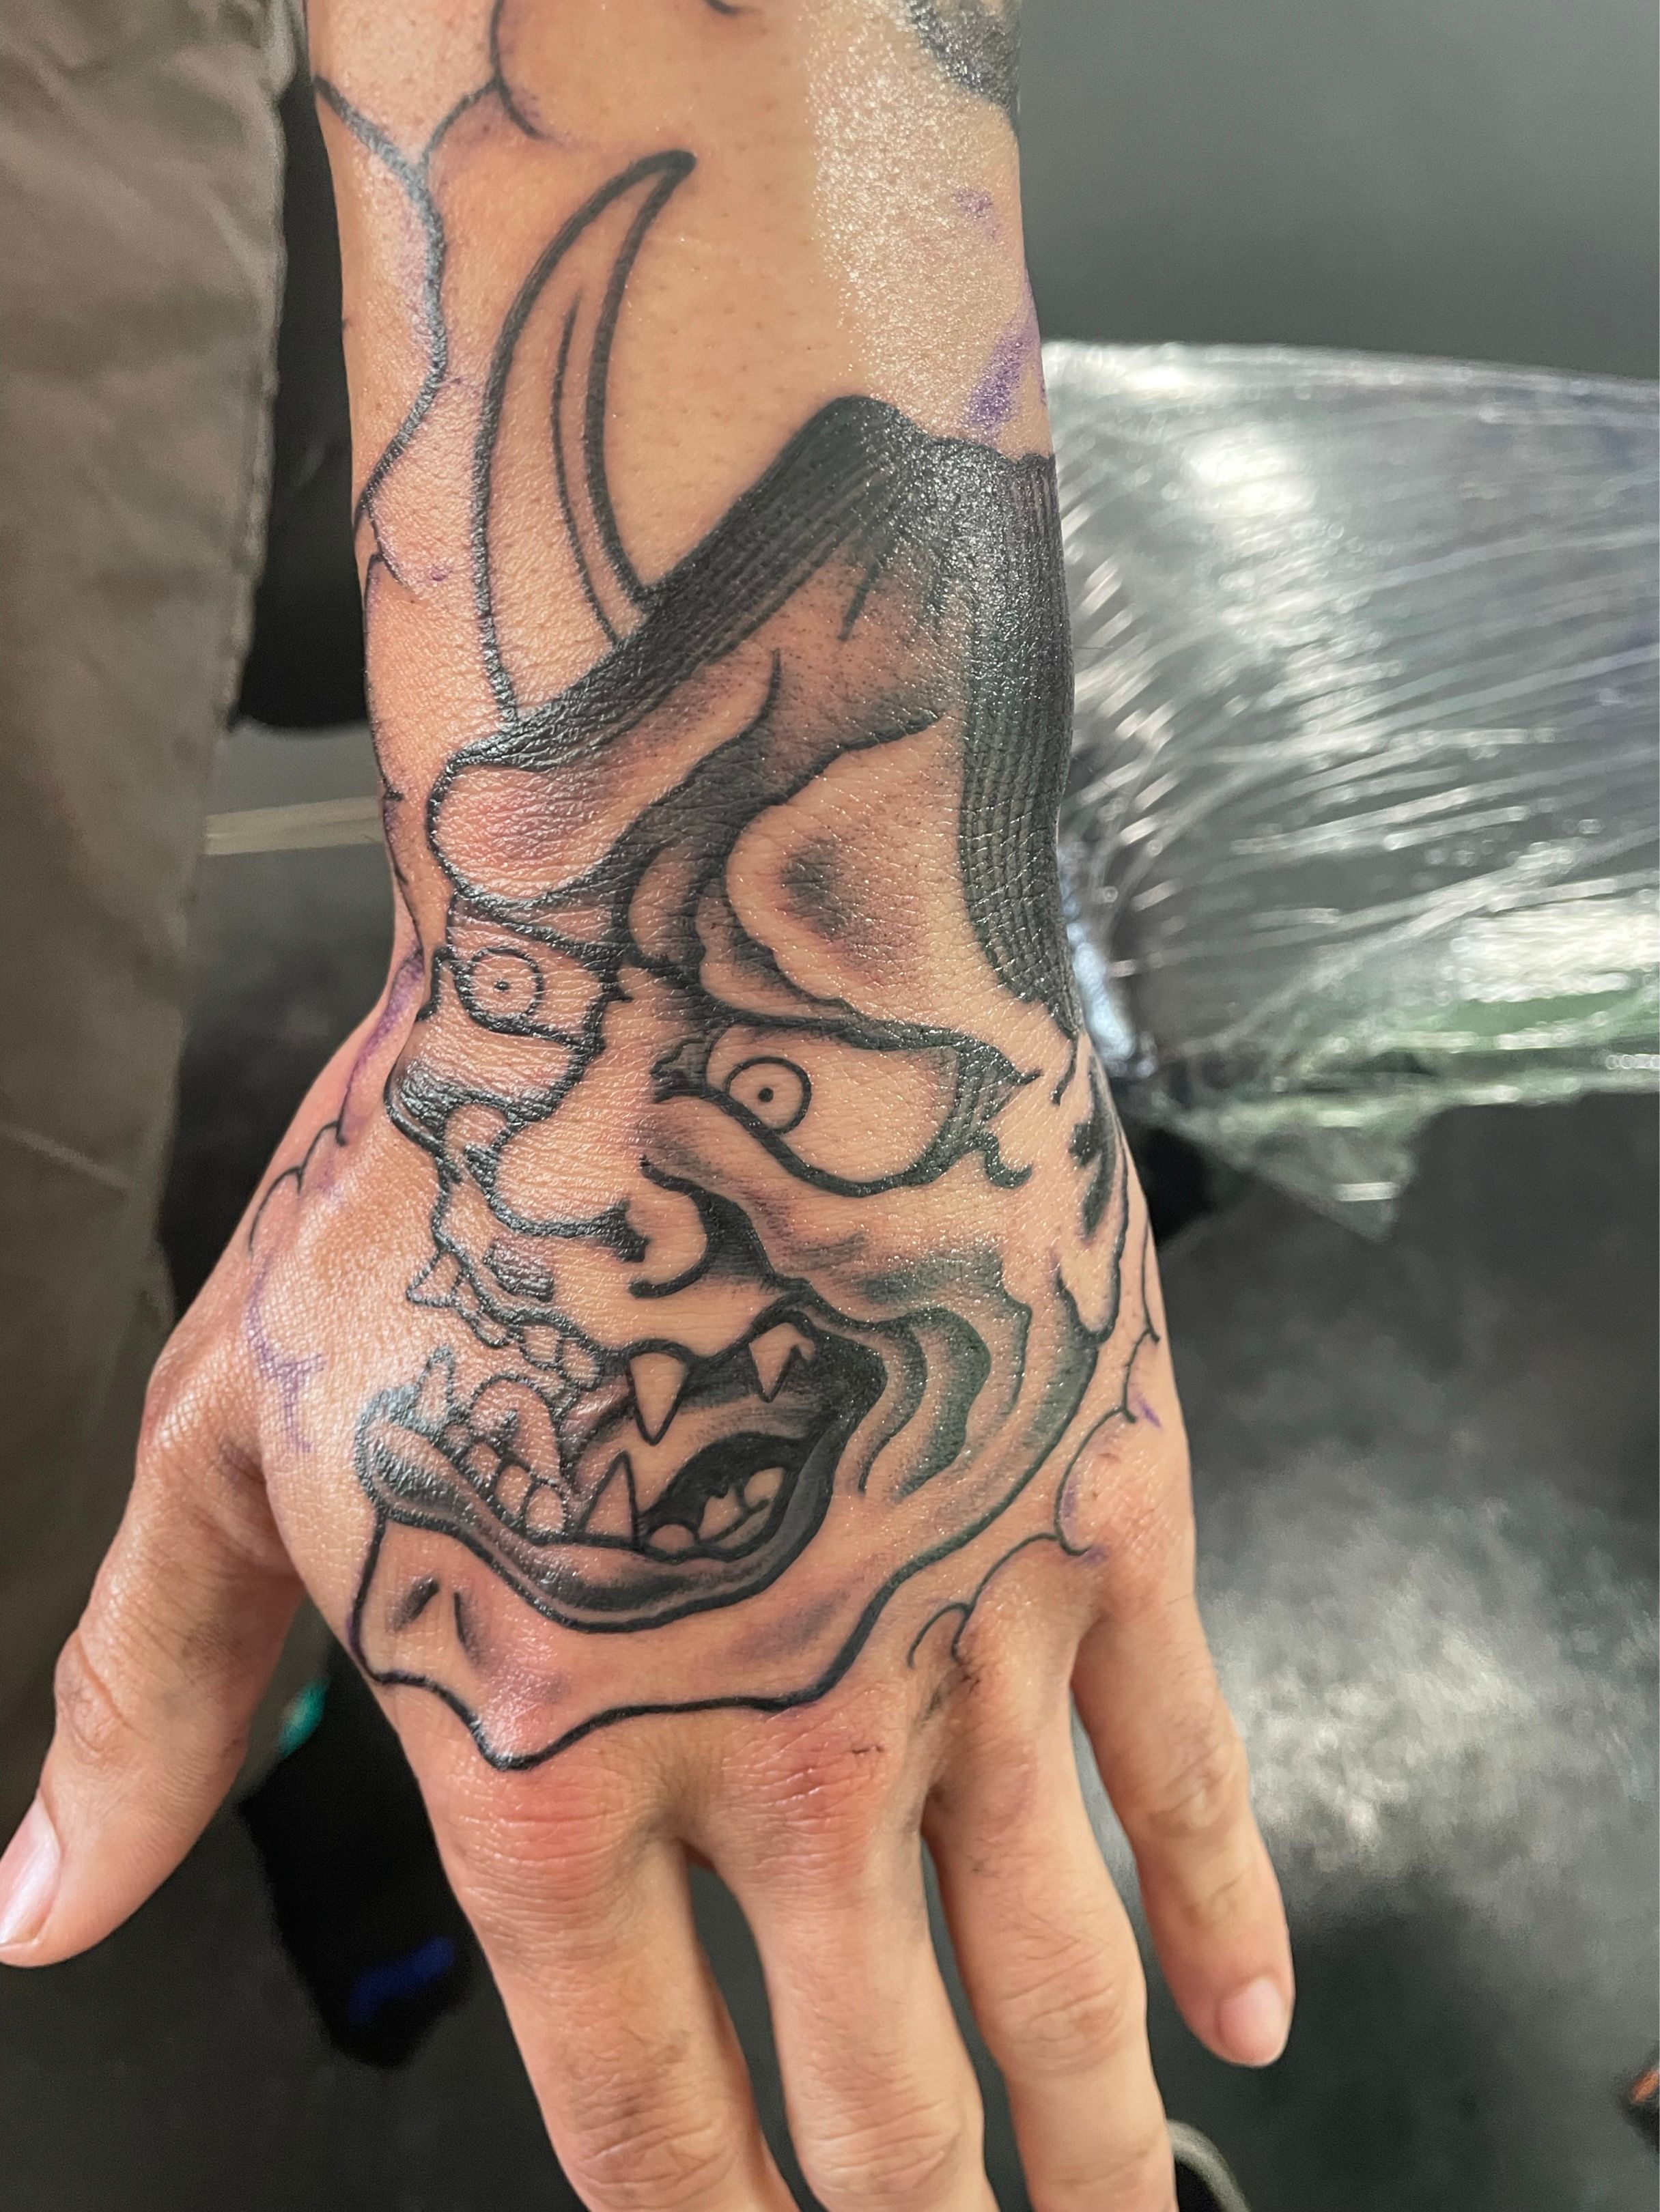 Best Tattoo Shops In Pittsburgh : Top 10 Best Tattoo Studios In Pittsburgh Pa Last Updated August 2021 Yelp : Please vote for us as best tattoo shop in pittsburgh.